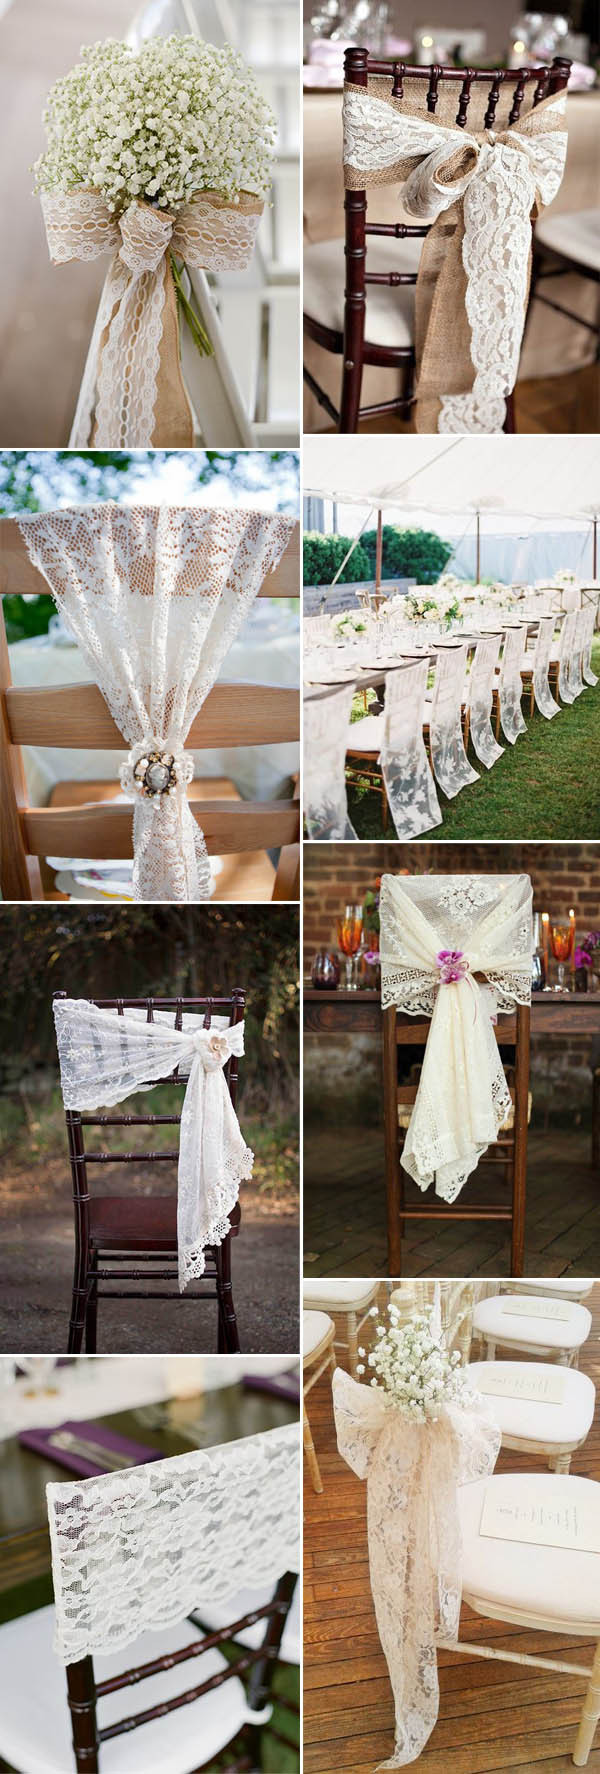 Lace Wedding Decorations
 50 Great Ideas To Incoporate Lace Into Your Vintage